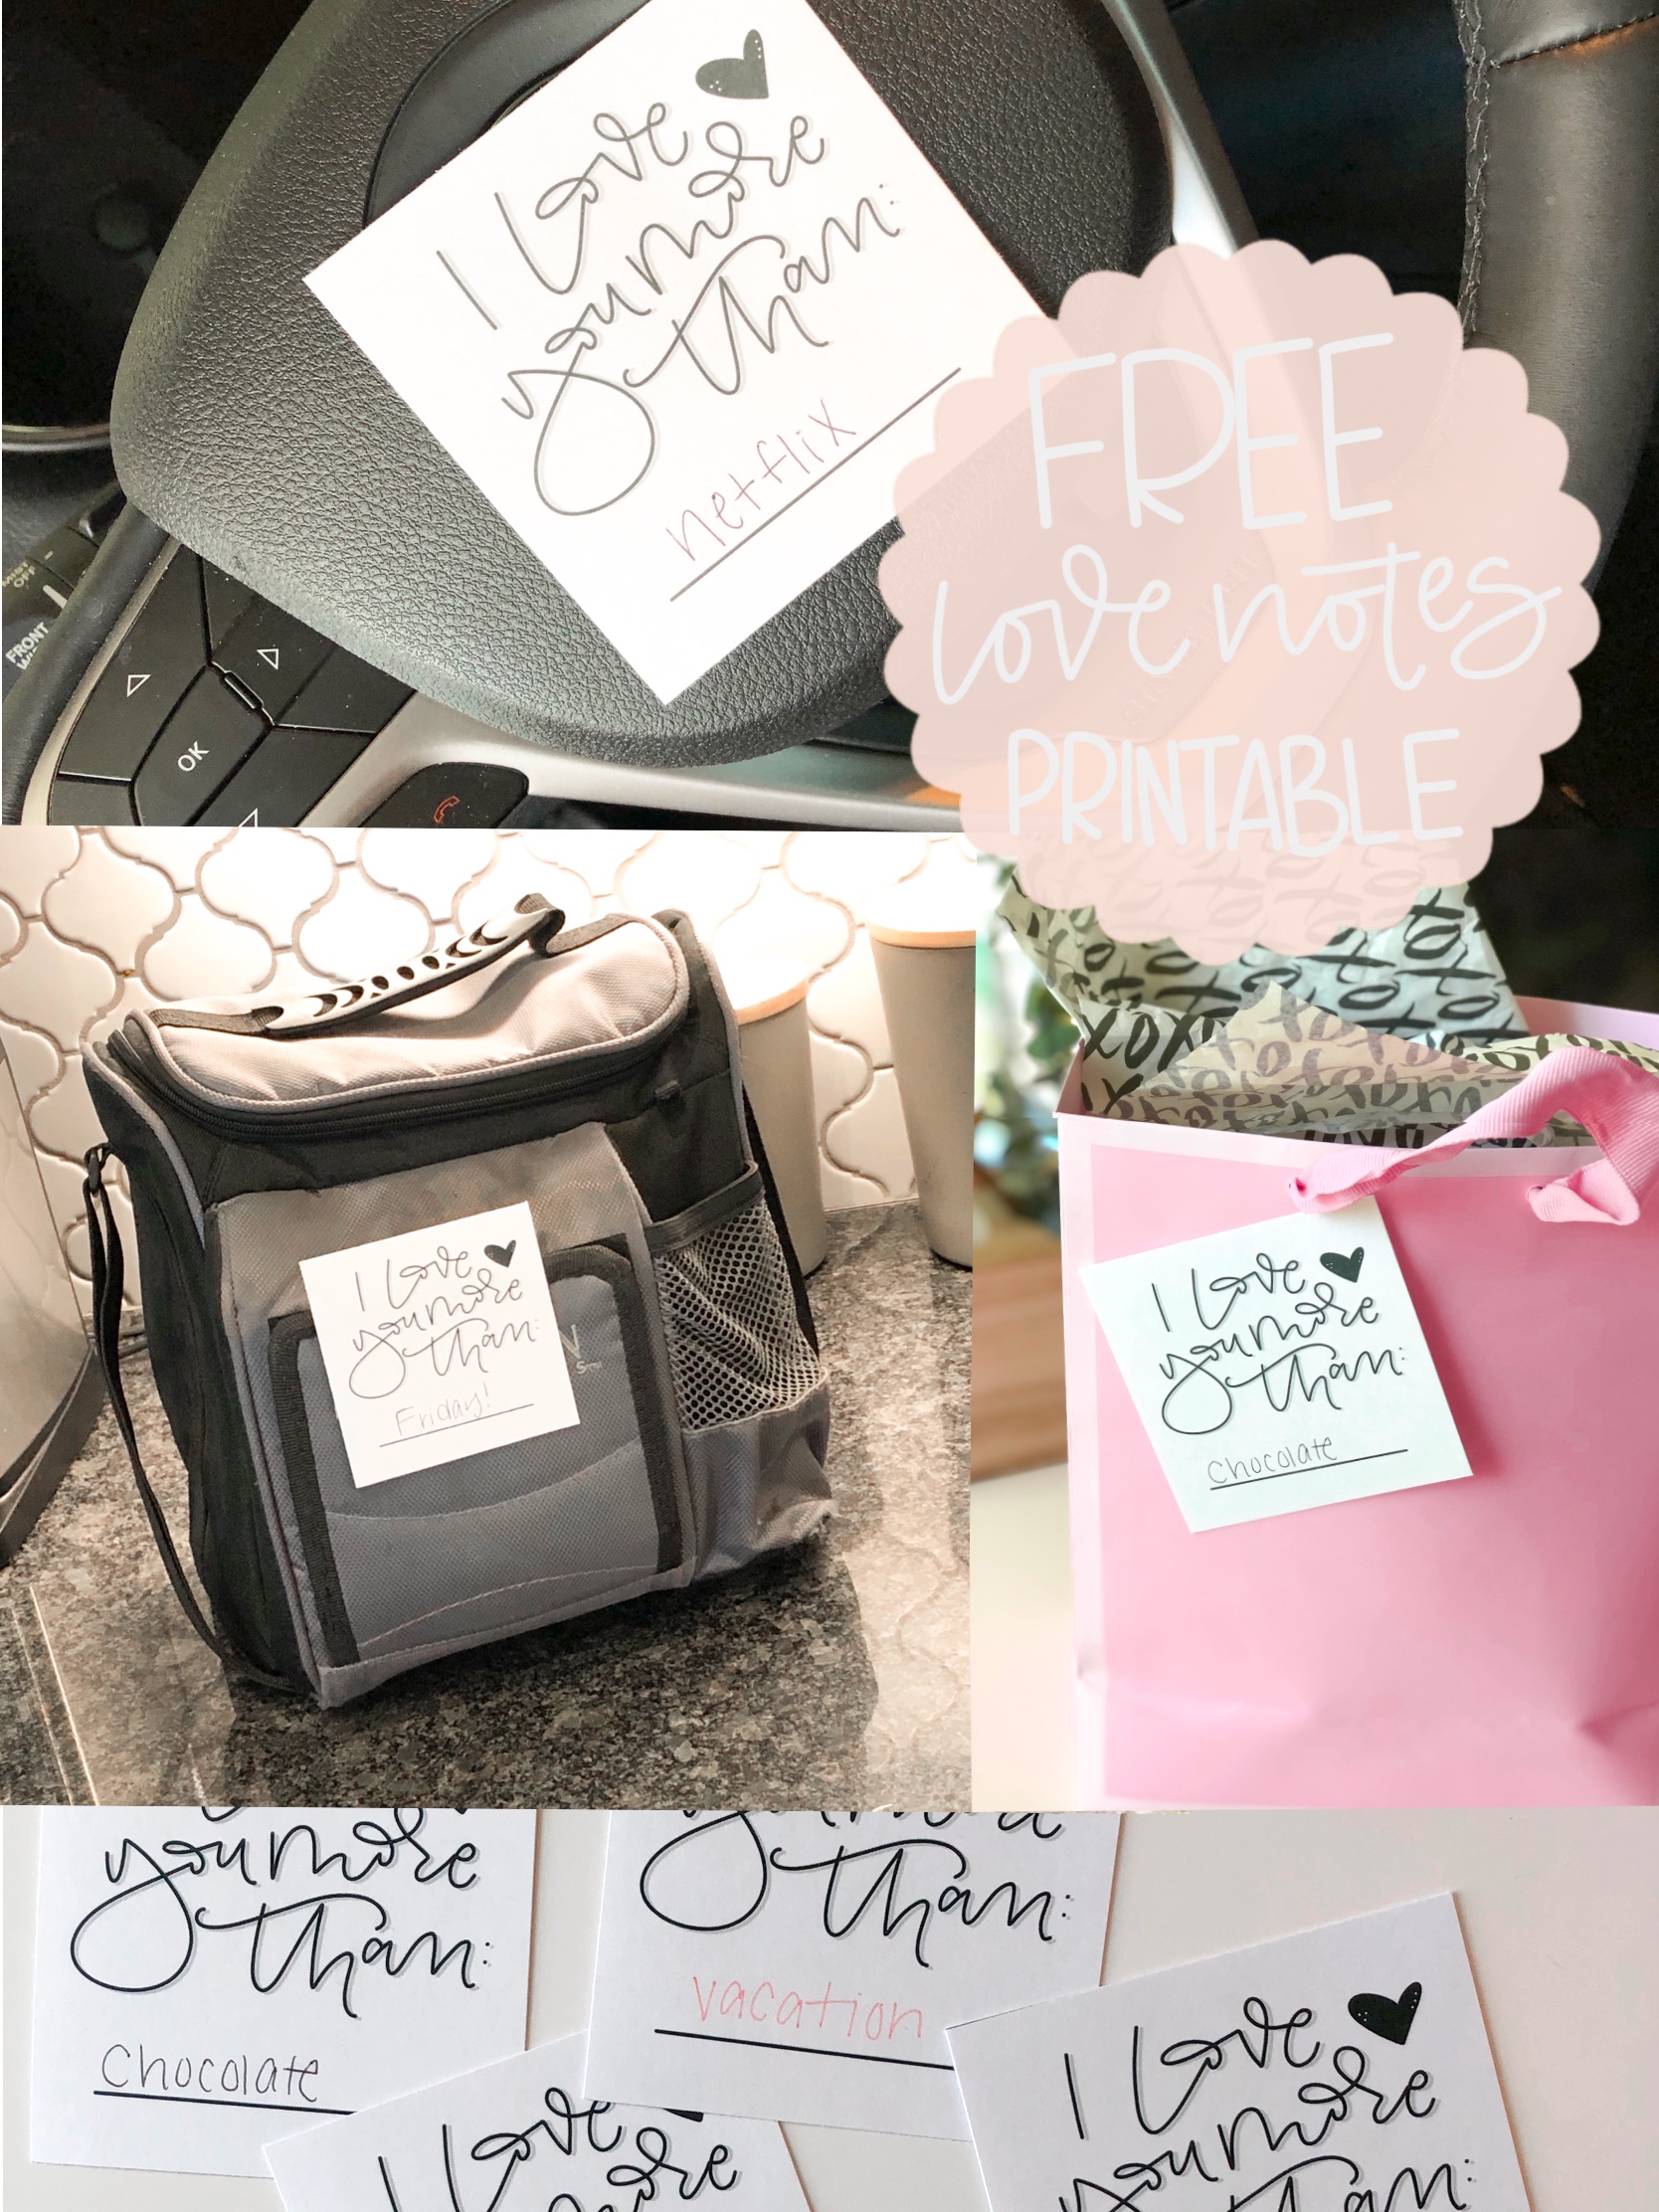 Love notes on a lunch box, steering wheel and gift bag